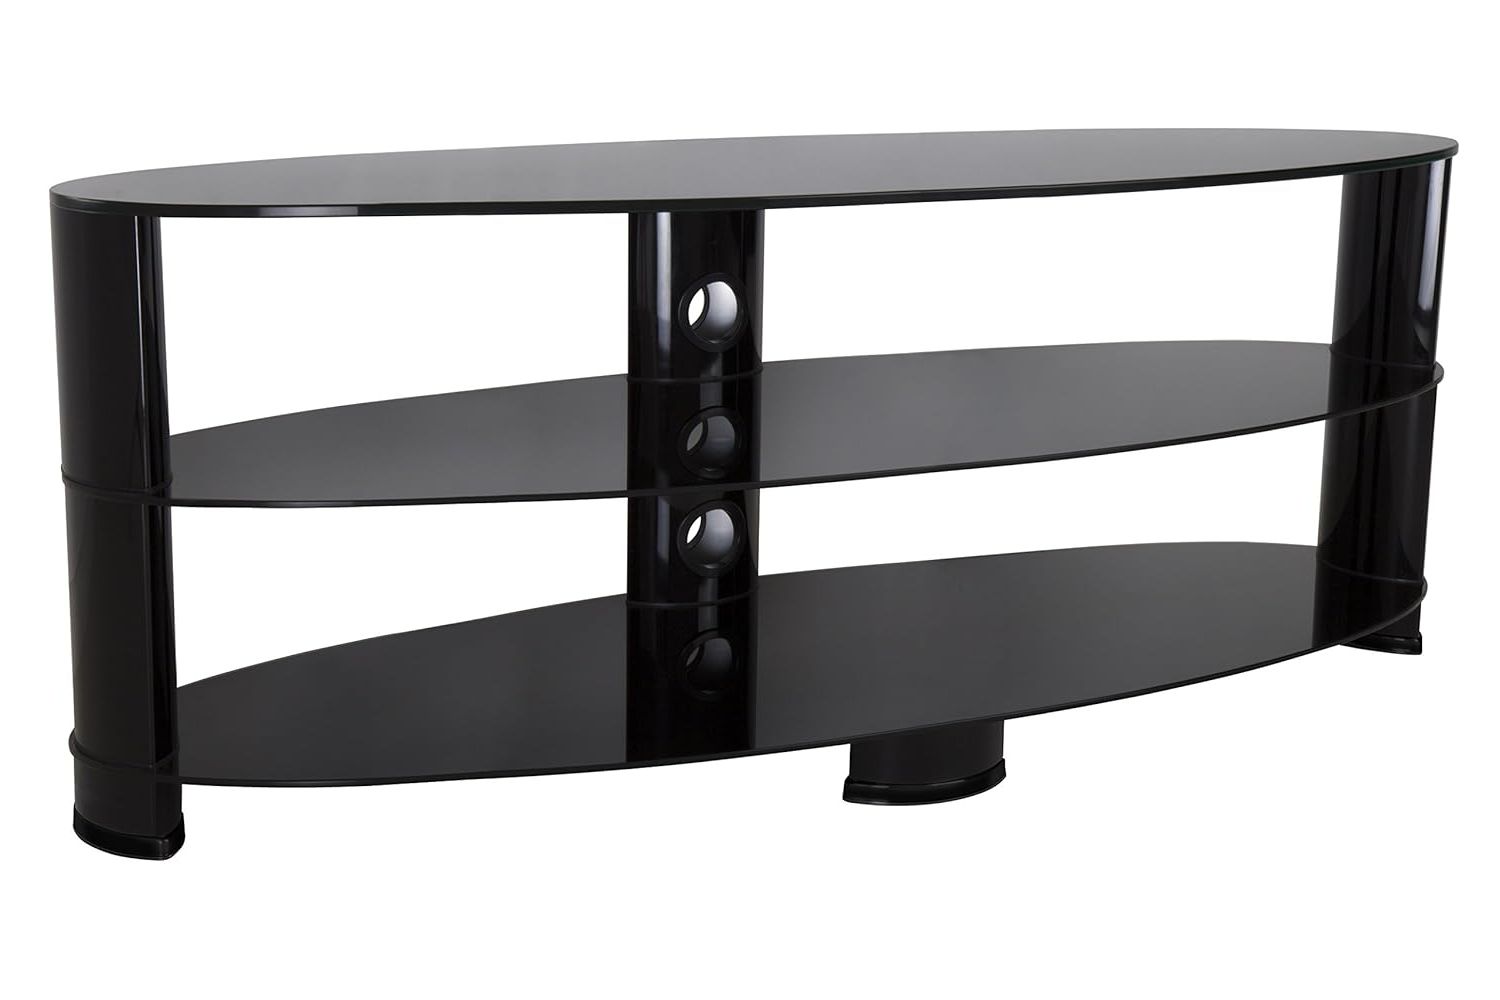 Avf Ovl1400bb A Tv Stand With Glass Shelves For Tvs Up To 65 Inch Regarding Well Liked Glass Shelves Tv Stands (Photo 10 of 15)